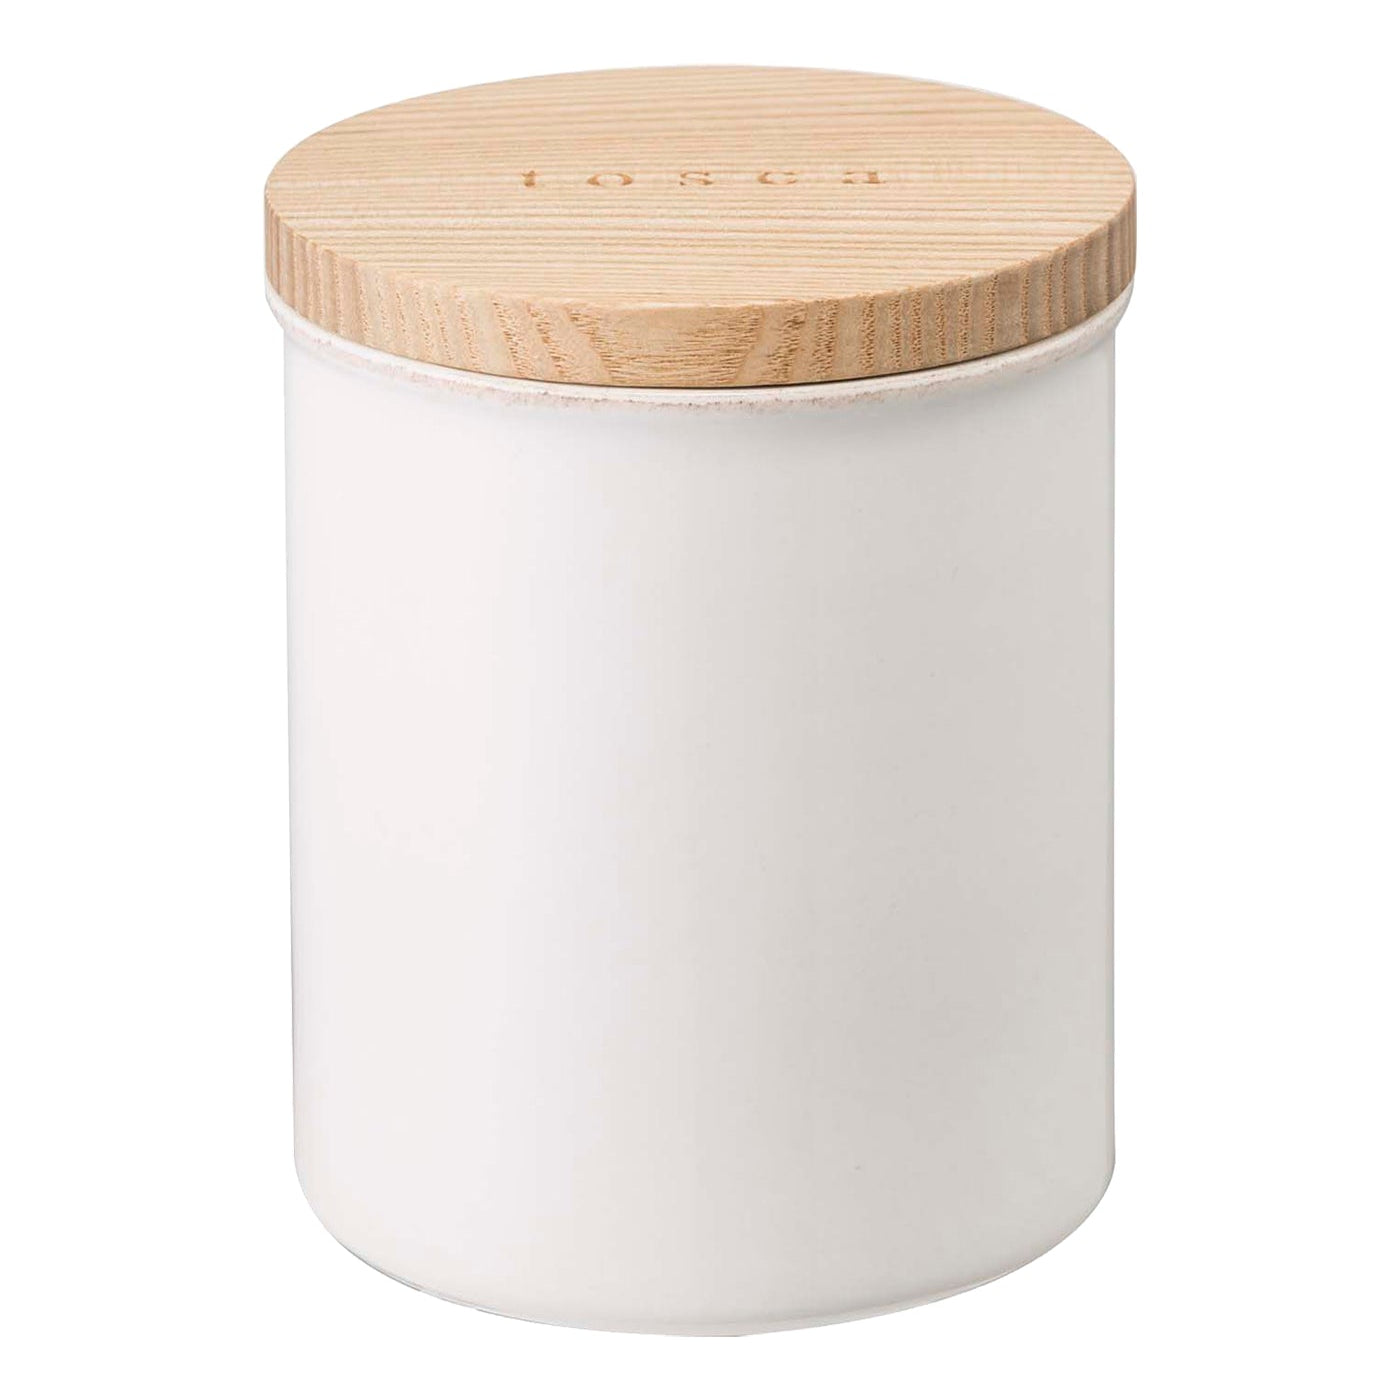 Ceramic-Canister-Four-Styles-Food-Storage